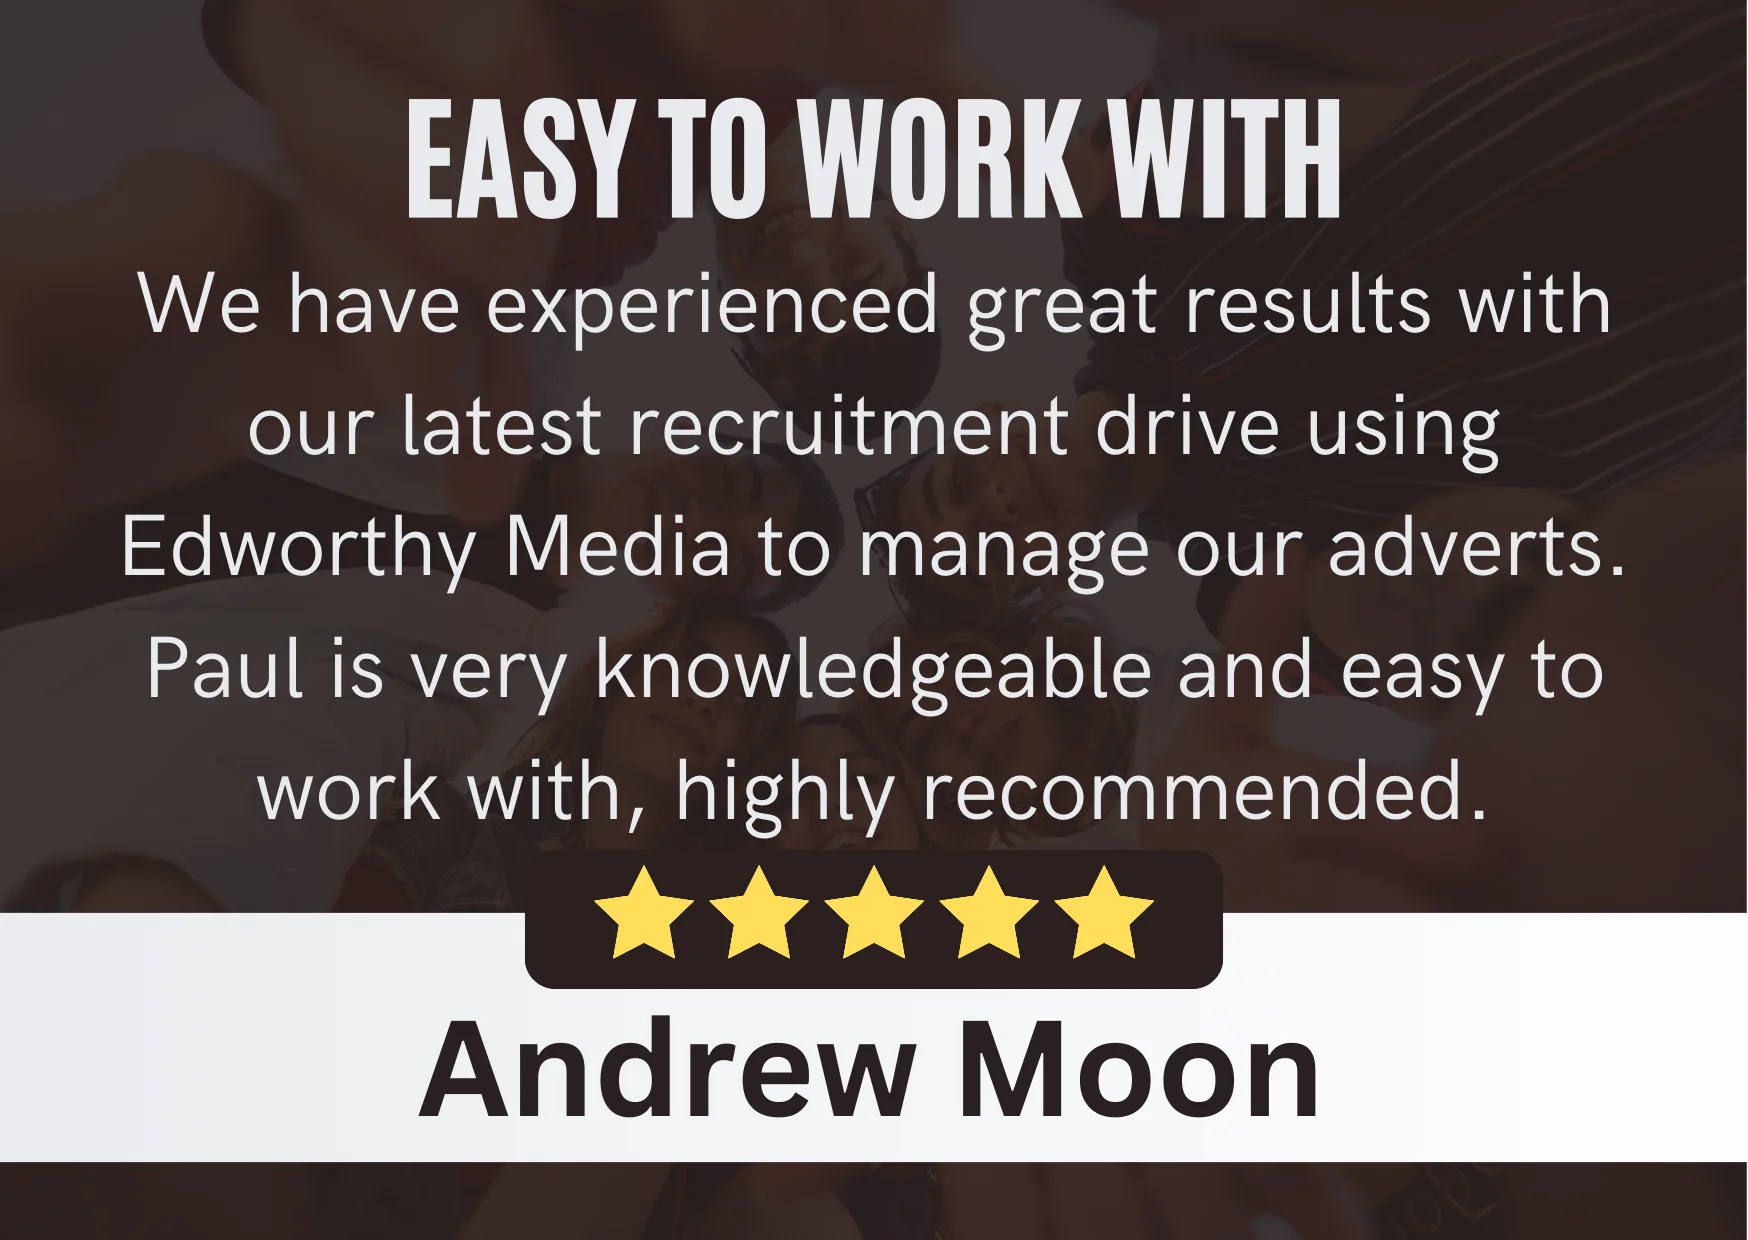 Andrew Moon - Edworthy Media Review | PPC Agency Social Media management Services Exeter. Review Content: We have experienced great results with our latest recruitment drive using Edworthy Media to manage our adverts. Paul is very knowledgeable and easy to work with, highly recommended.